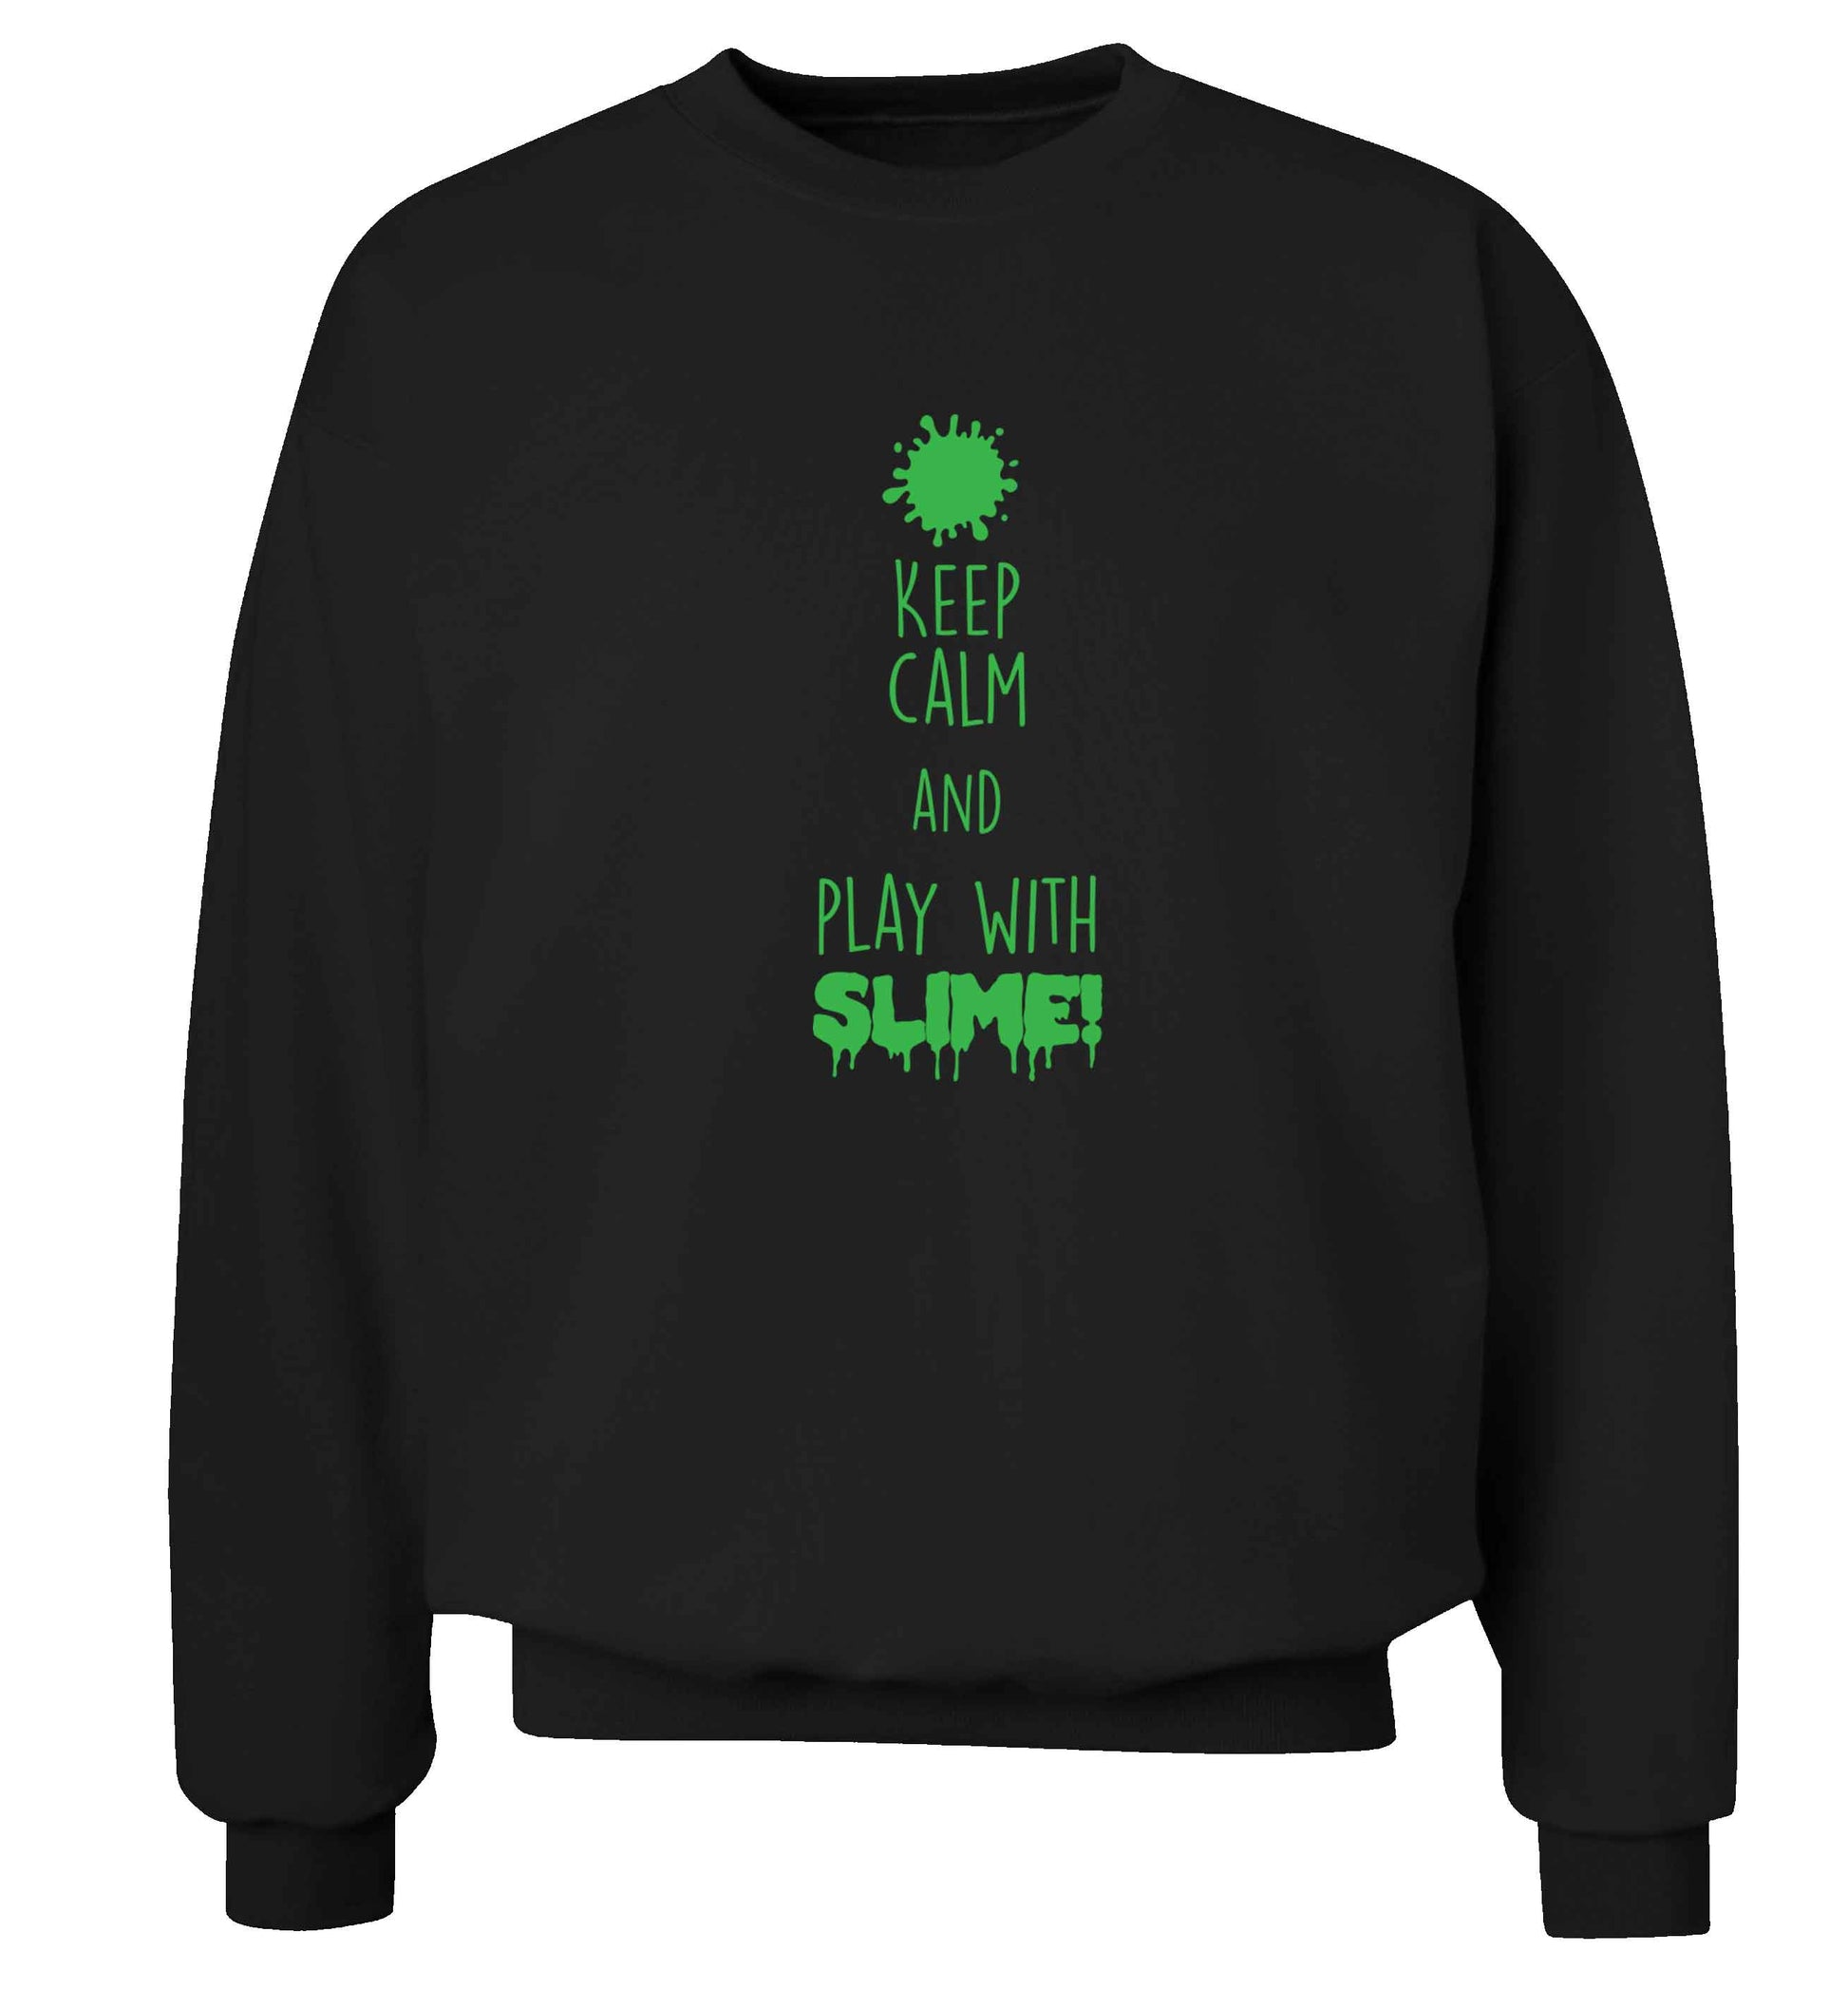 Neon green keep calm and play with slime!adult's unisex black sweater 2XL